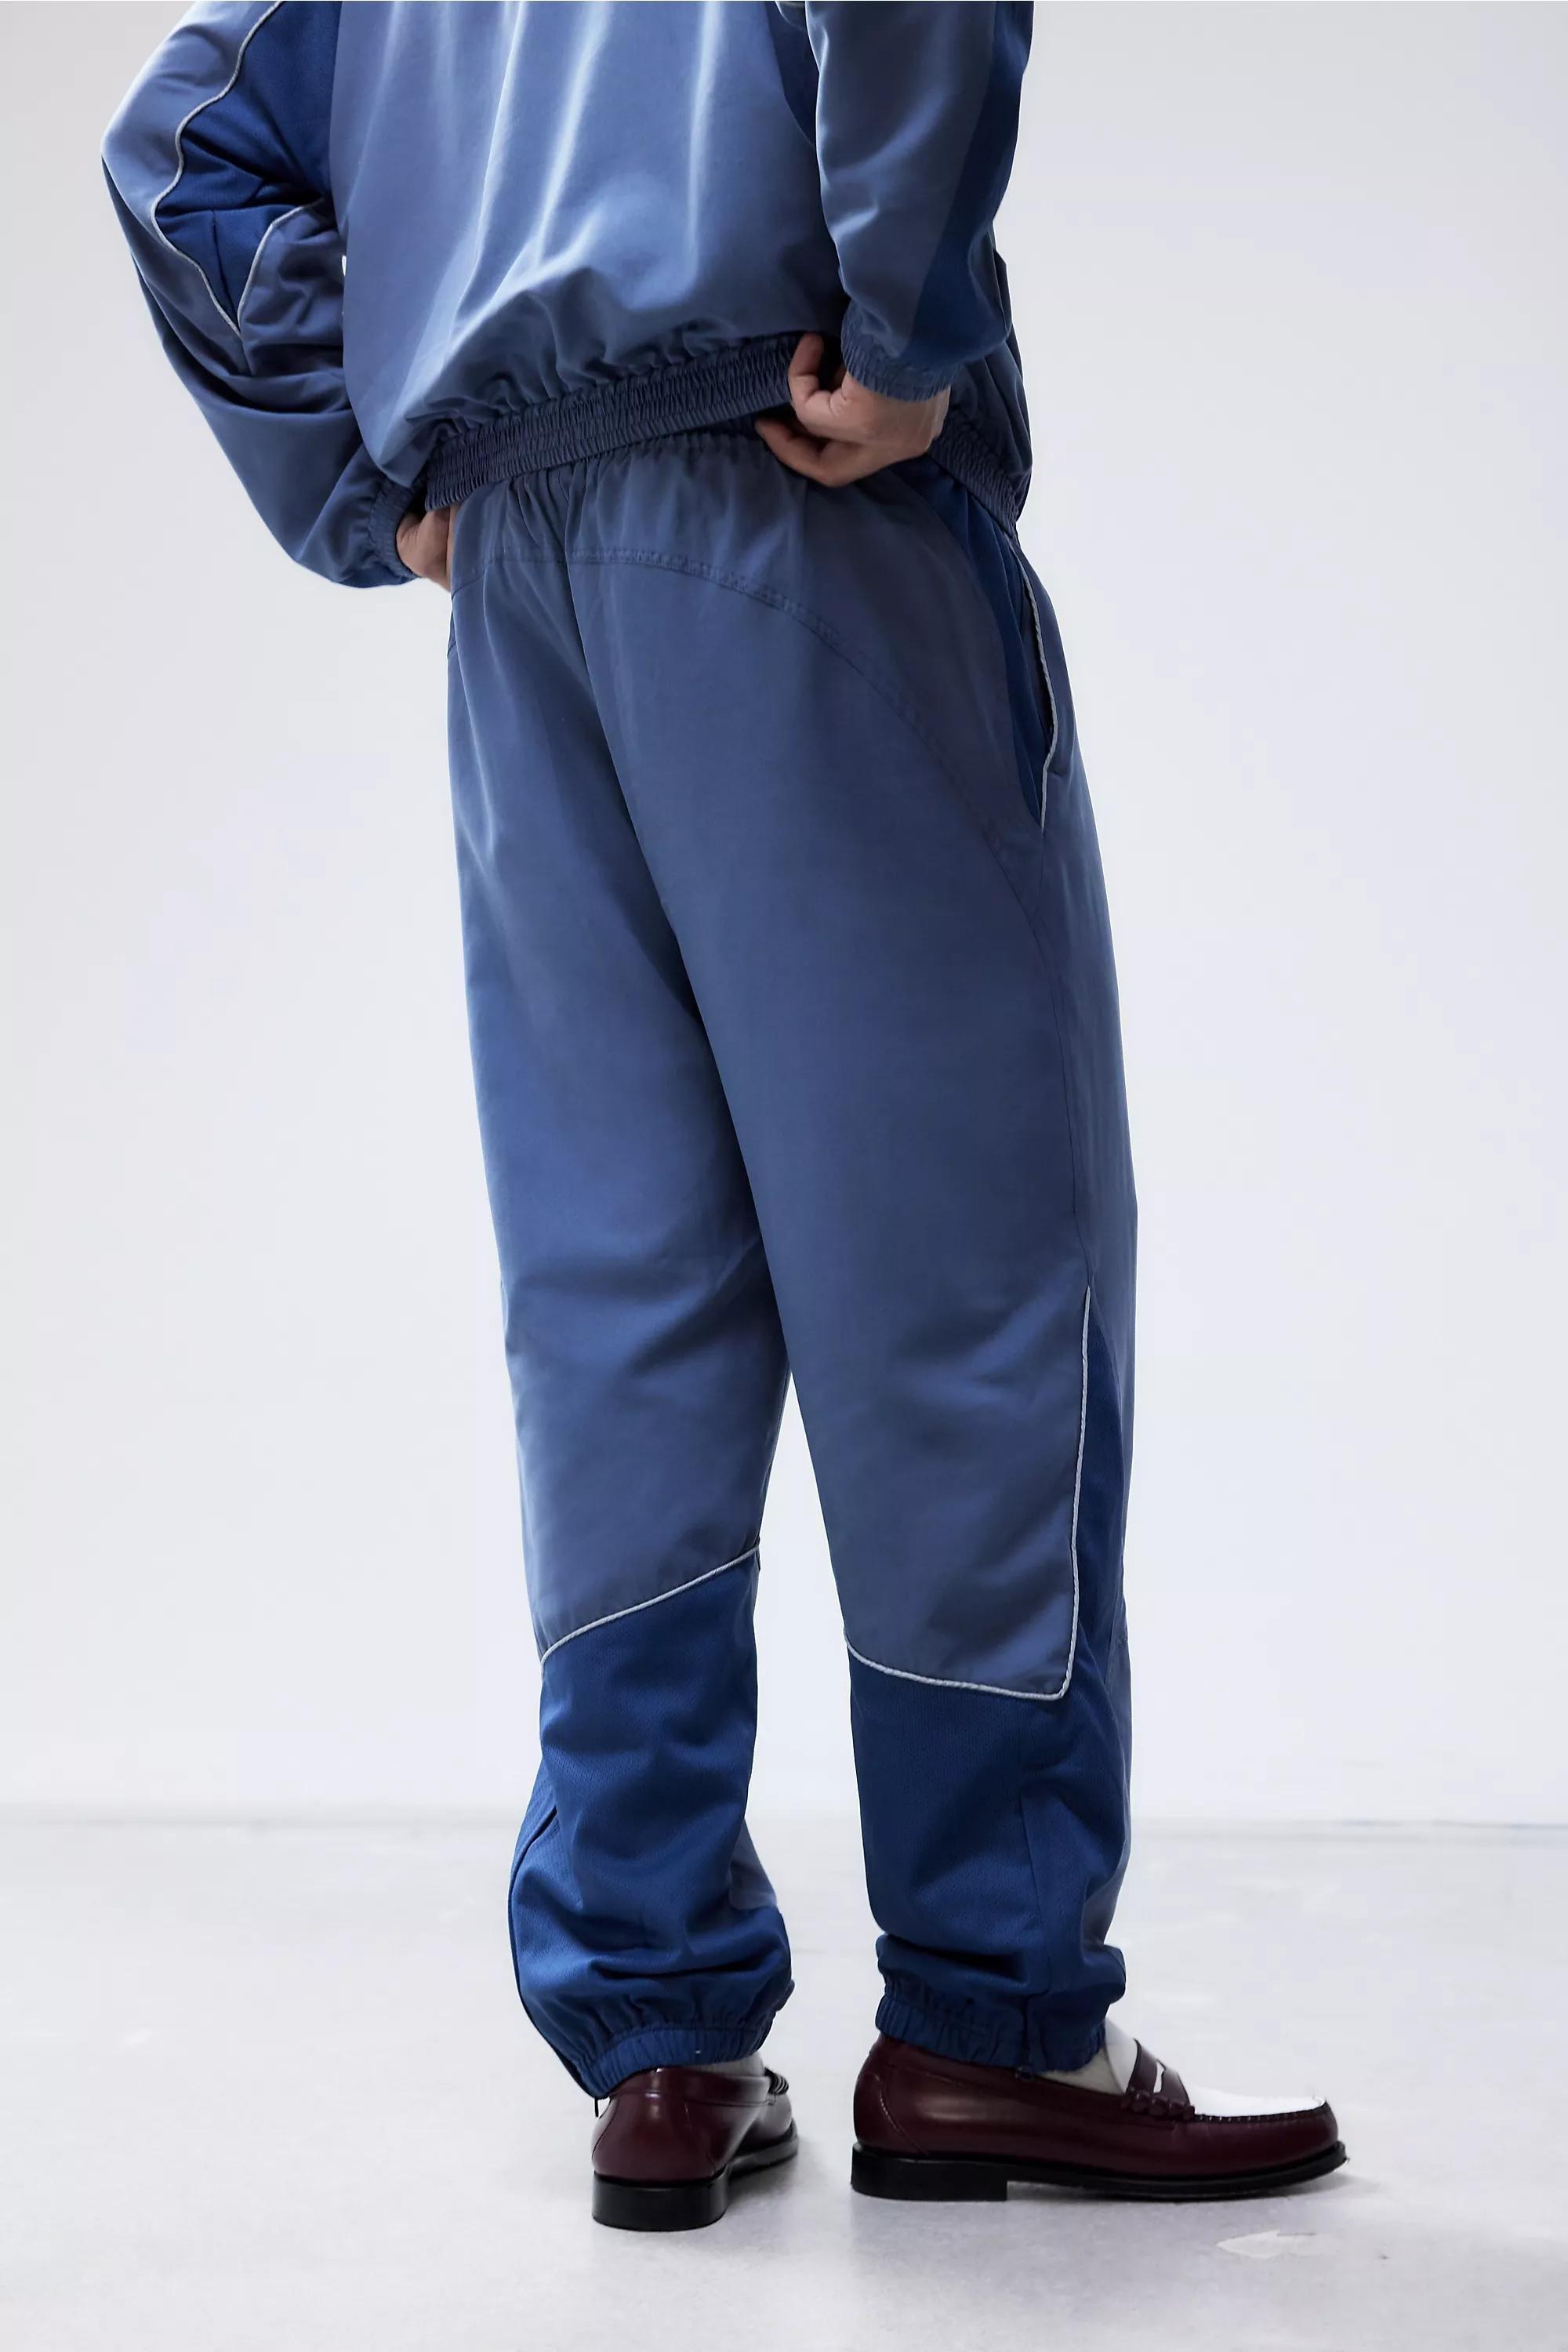 Urban Outfitters - Navy Track Pants